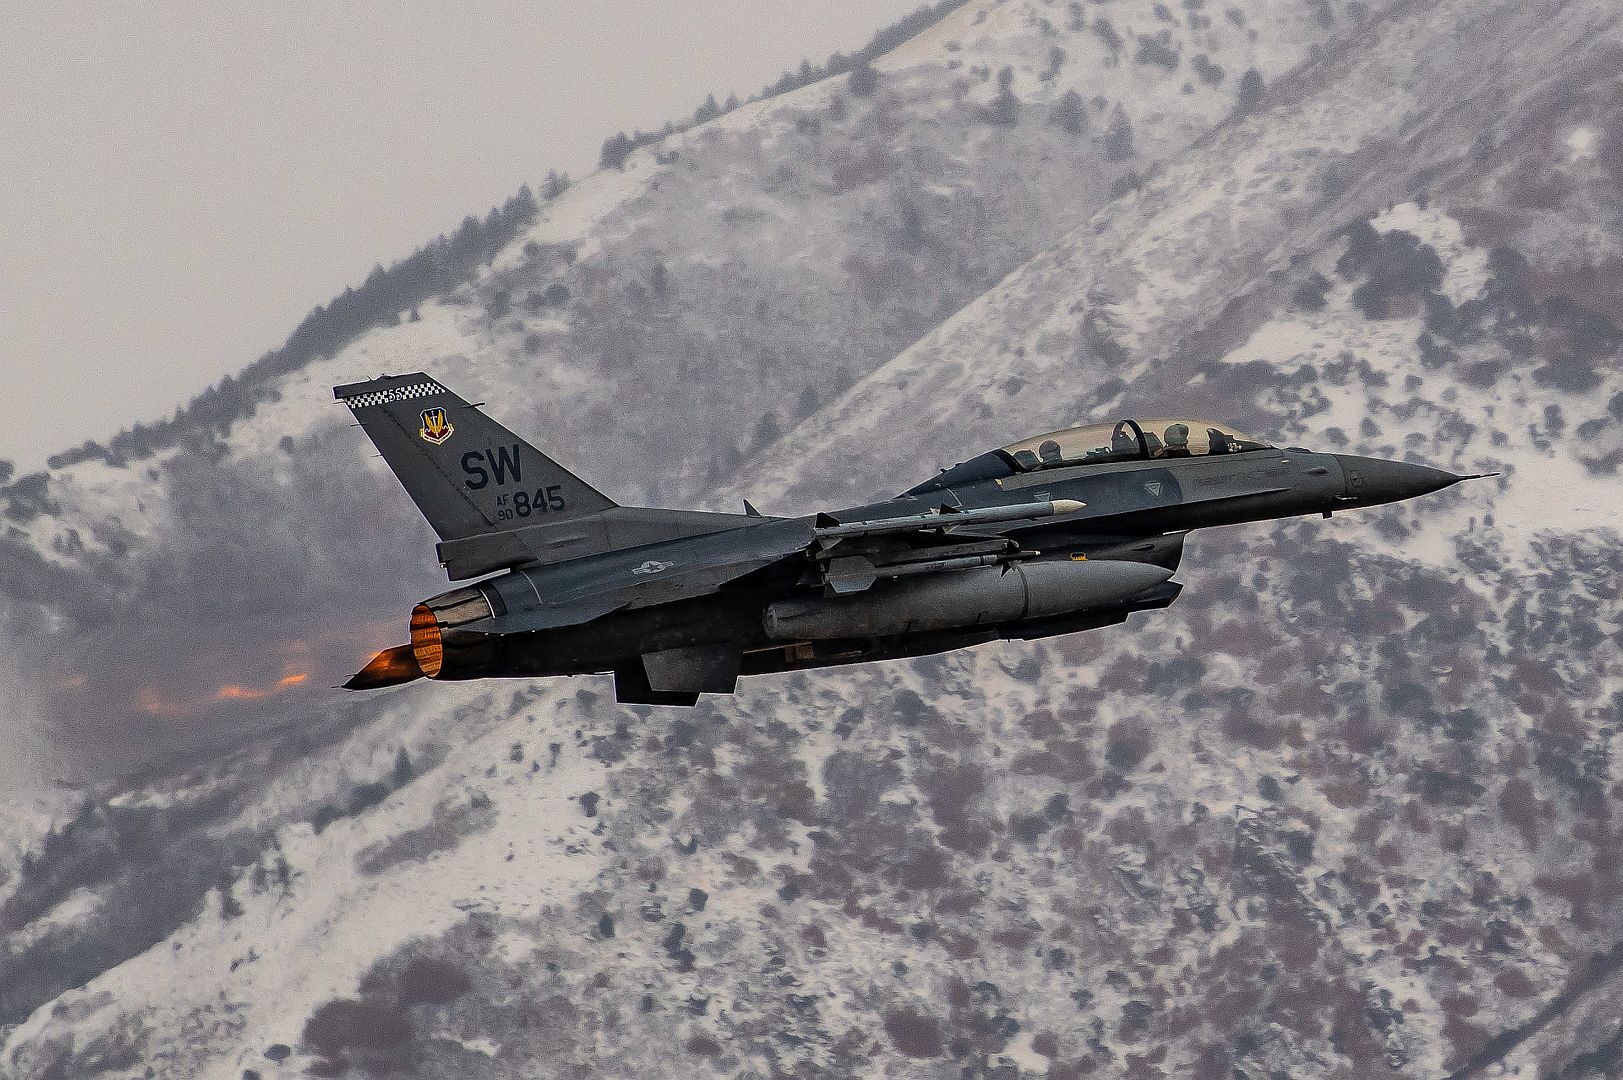 F 16 Viper Pilot Assigned To The 55th Fighter Squadron Takes Off While Participating In The Weapons Systems Evaluation Program